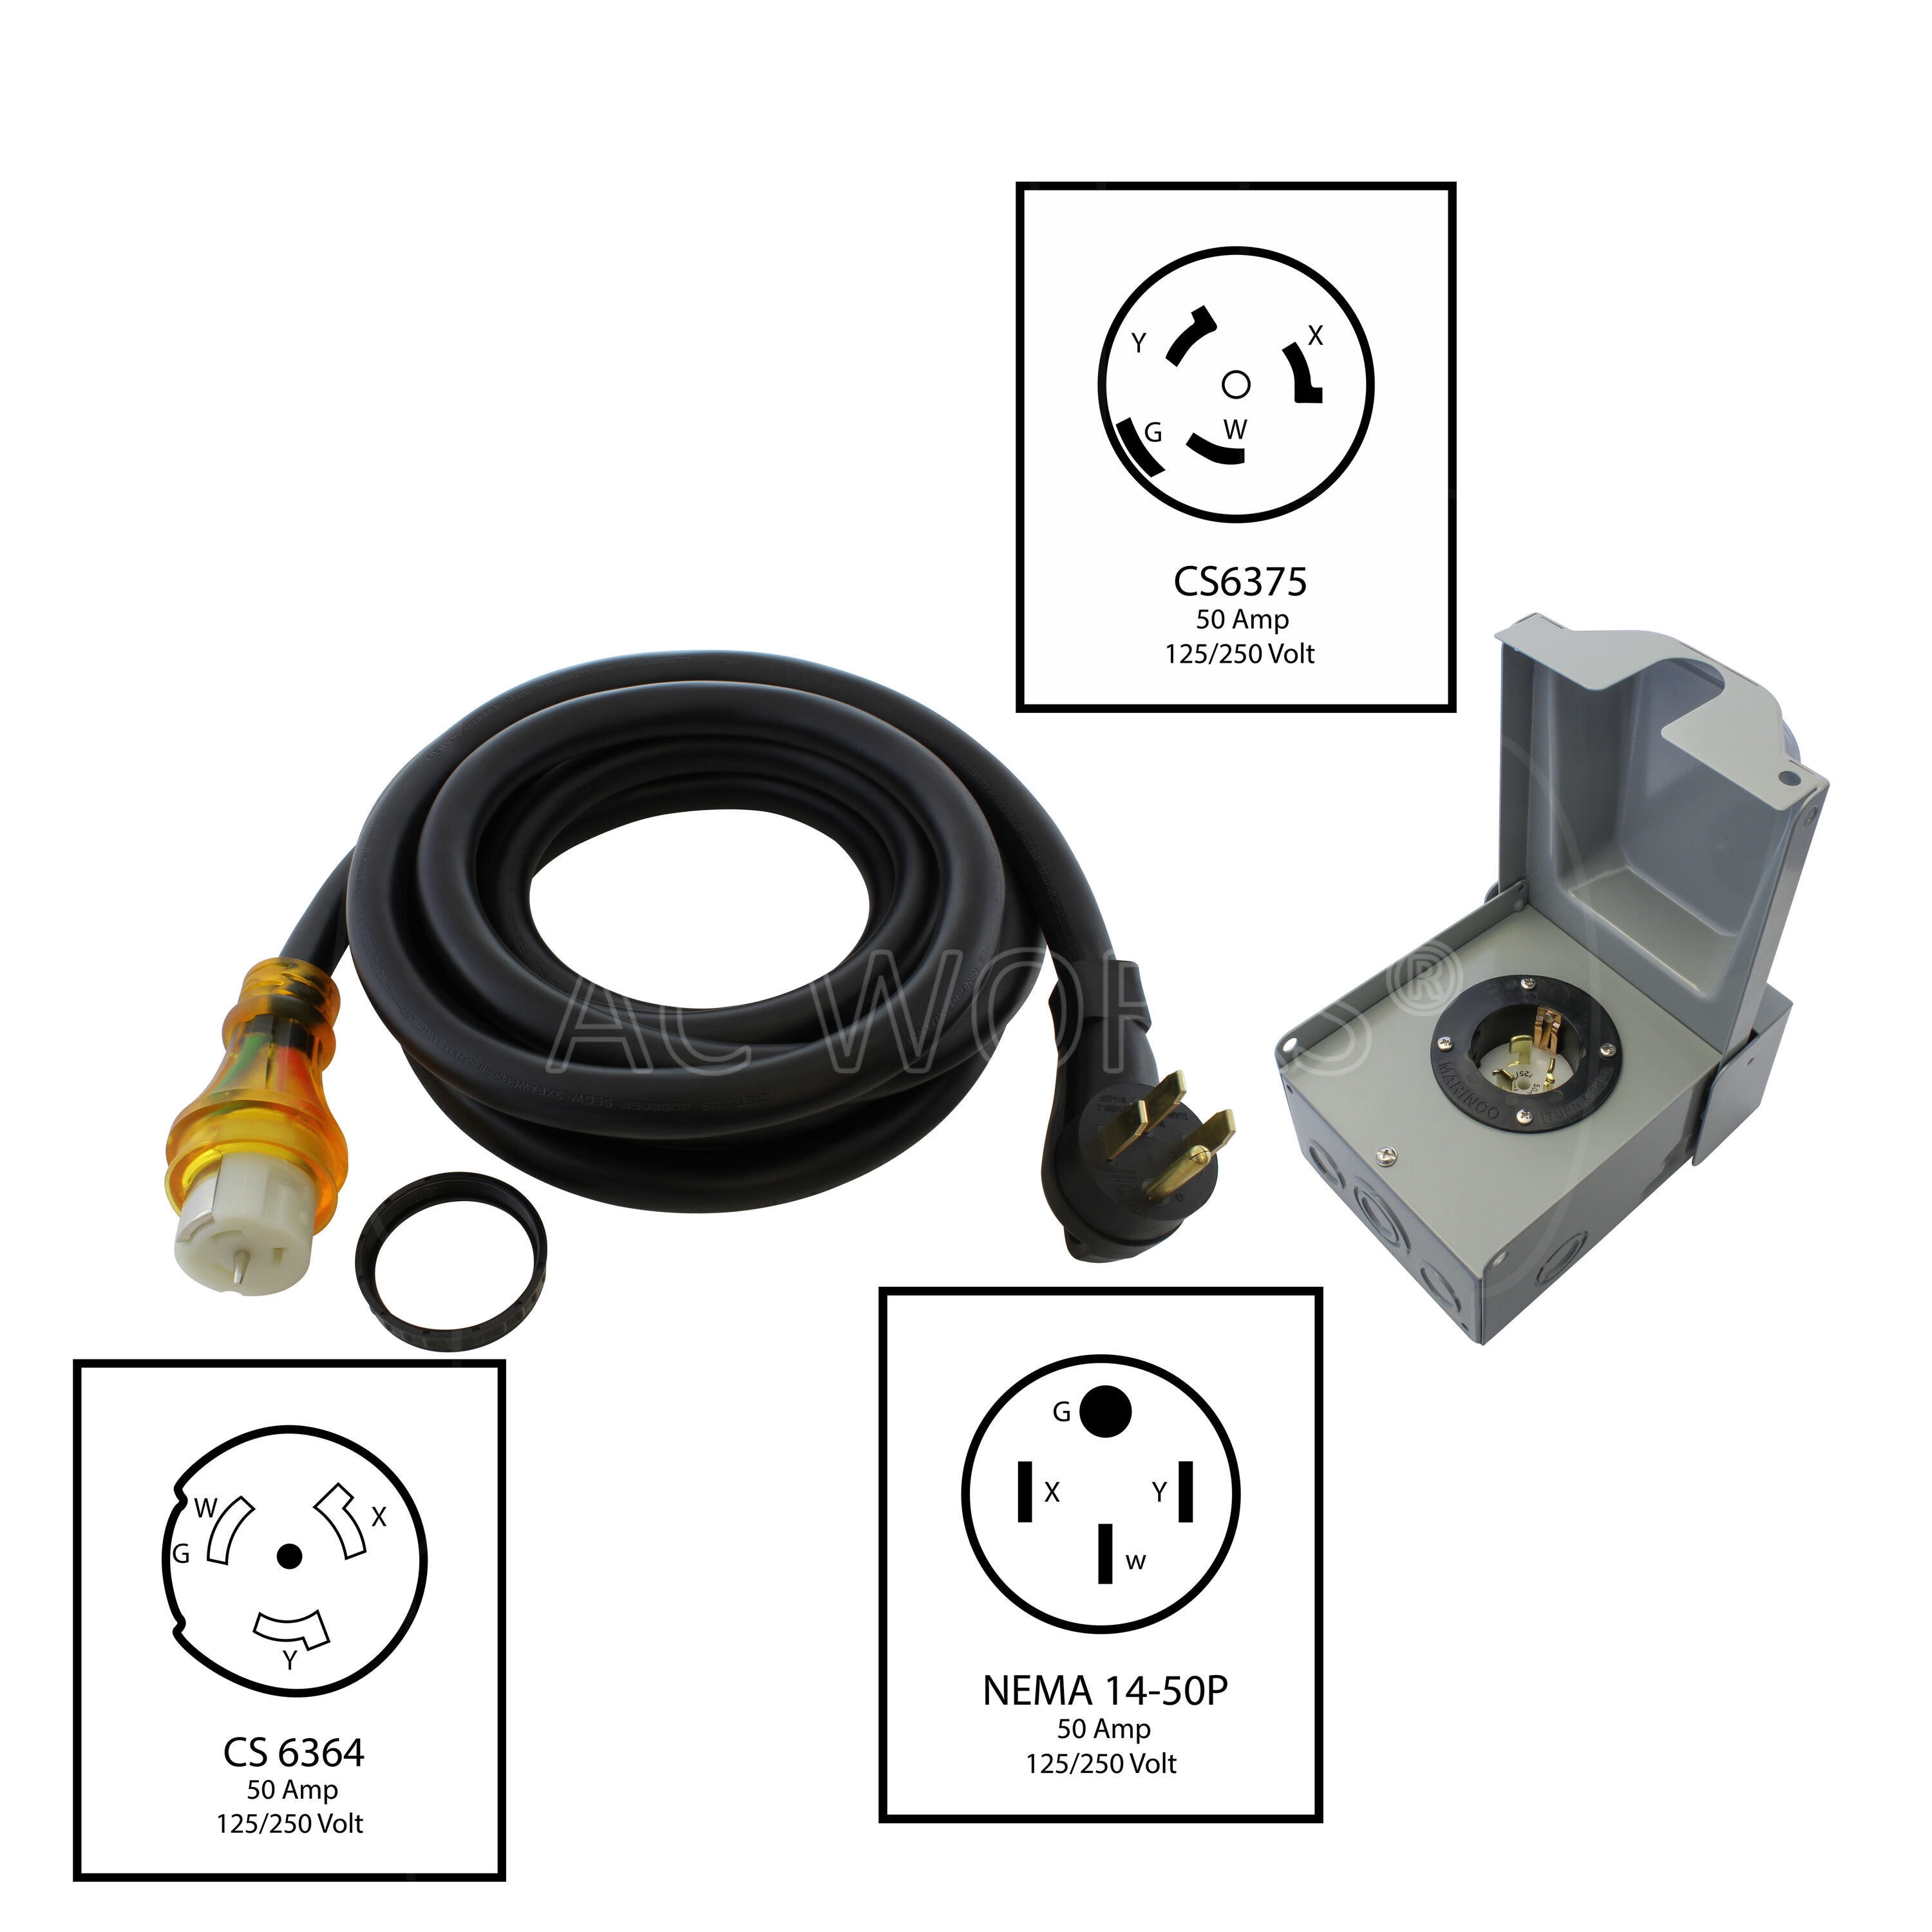 25FT Generator RV Extension Cord + Power Inlet Box Combo Kit 50Amp